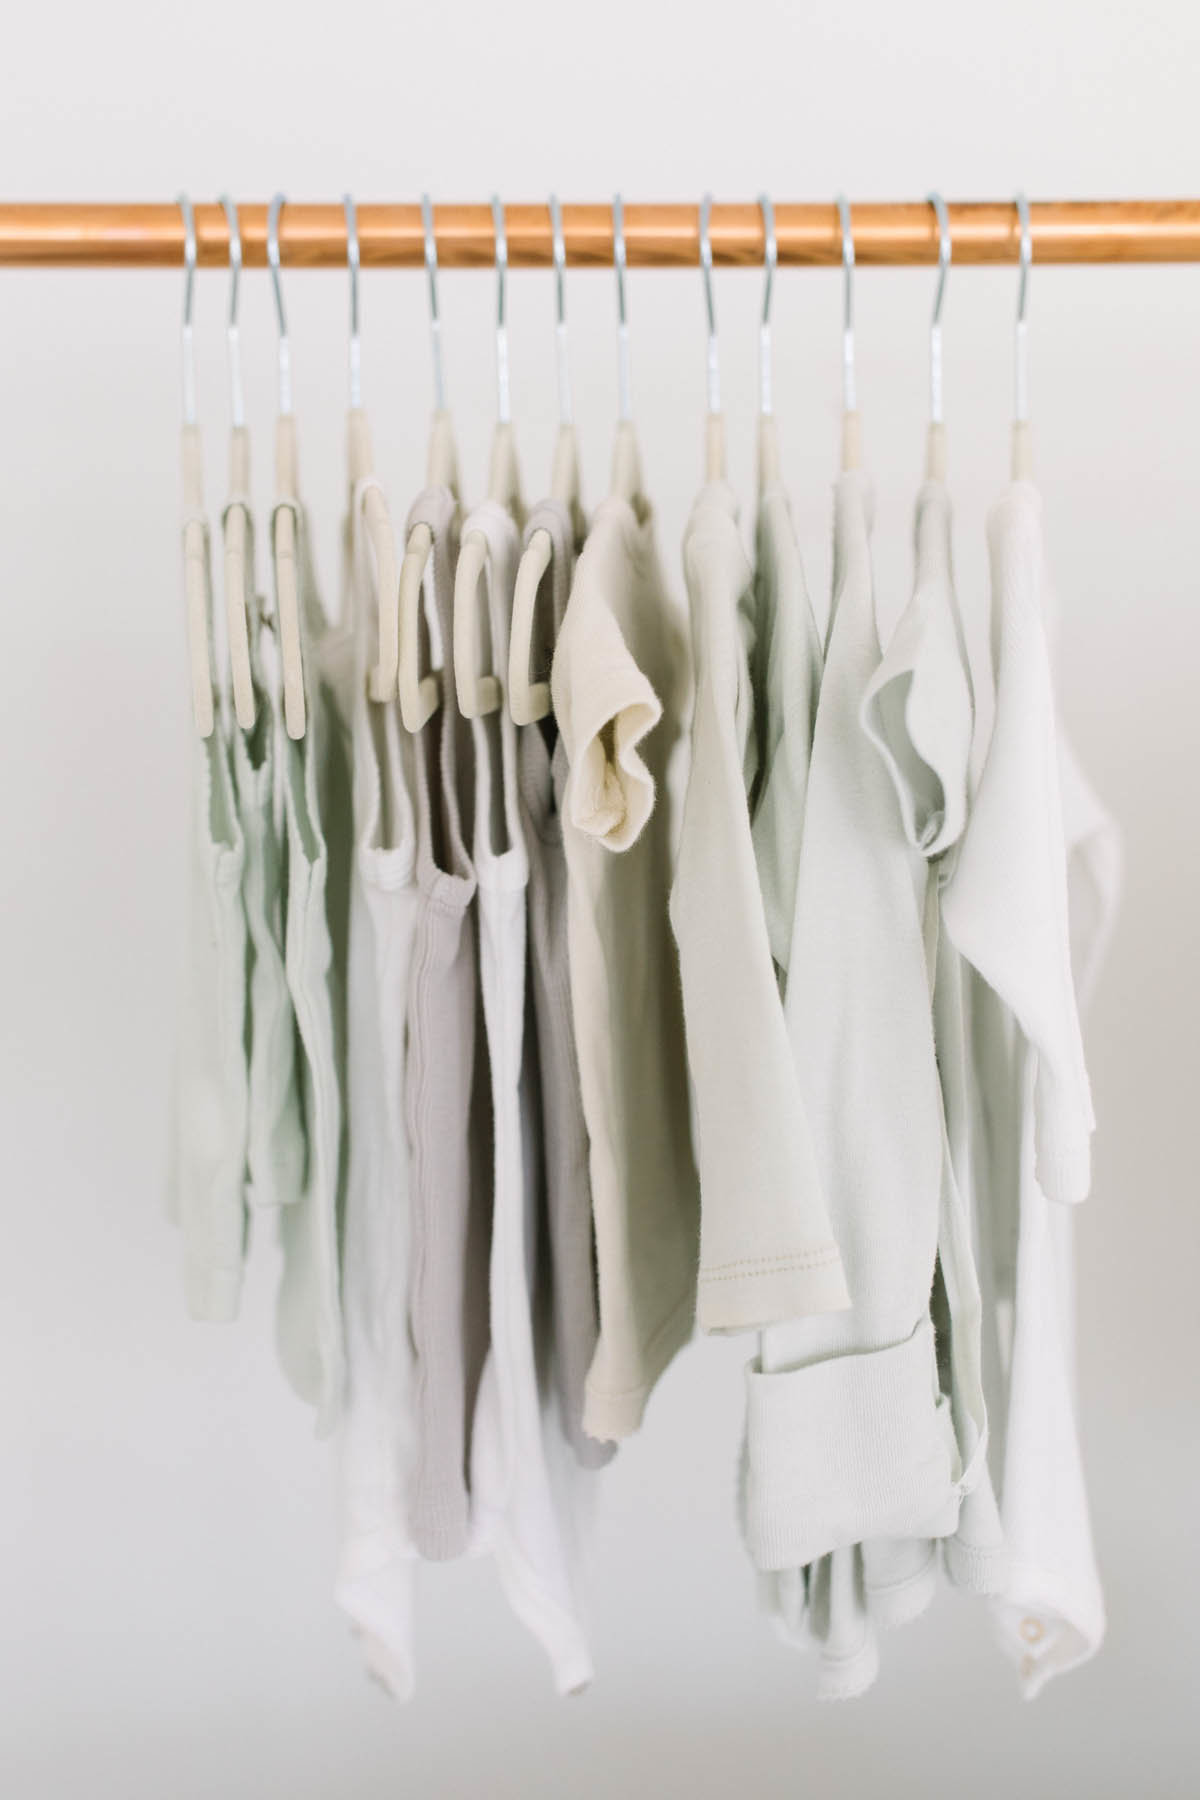 Elle Baker Photography offers a full studio wardrobe for her baby clients